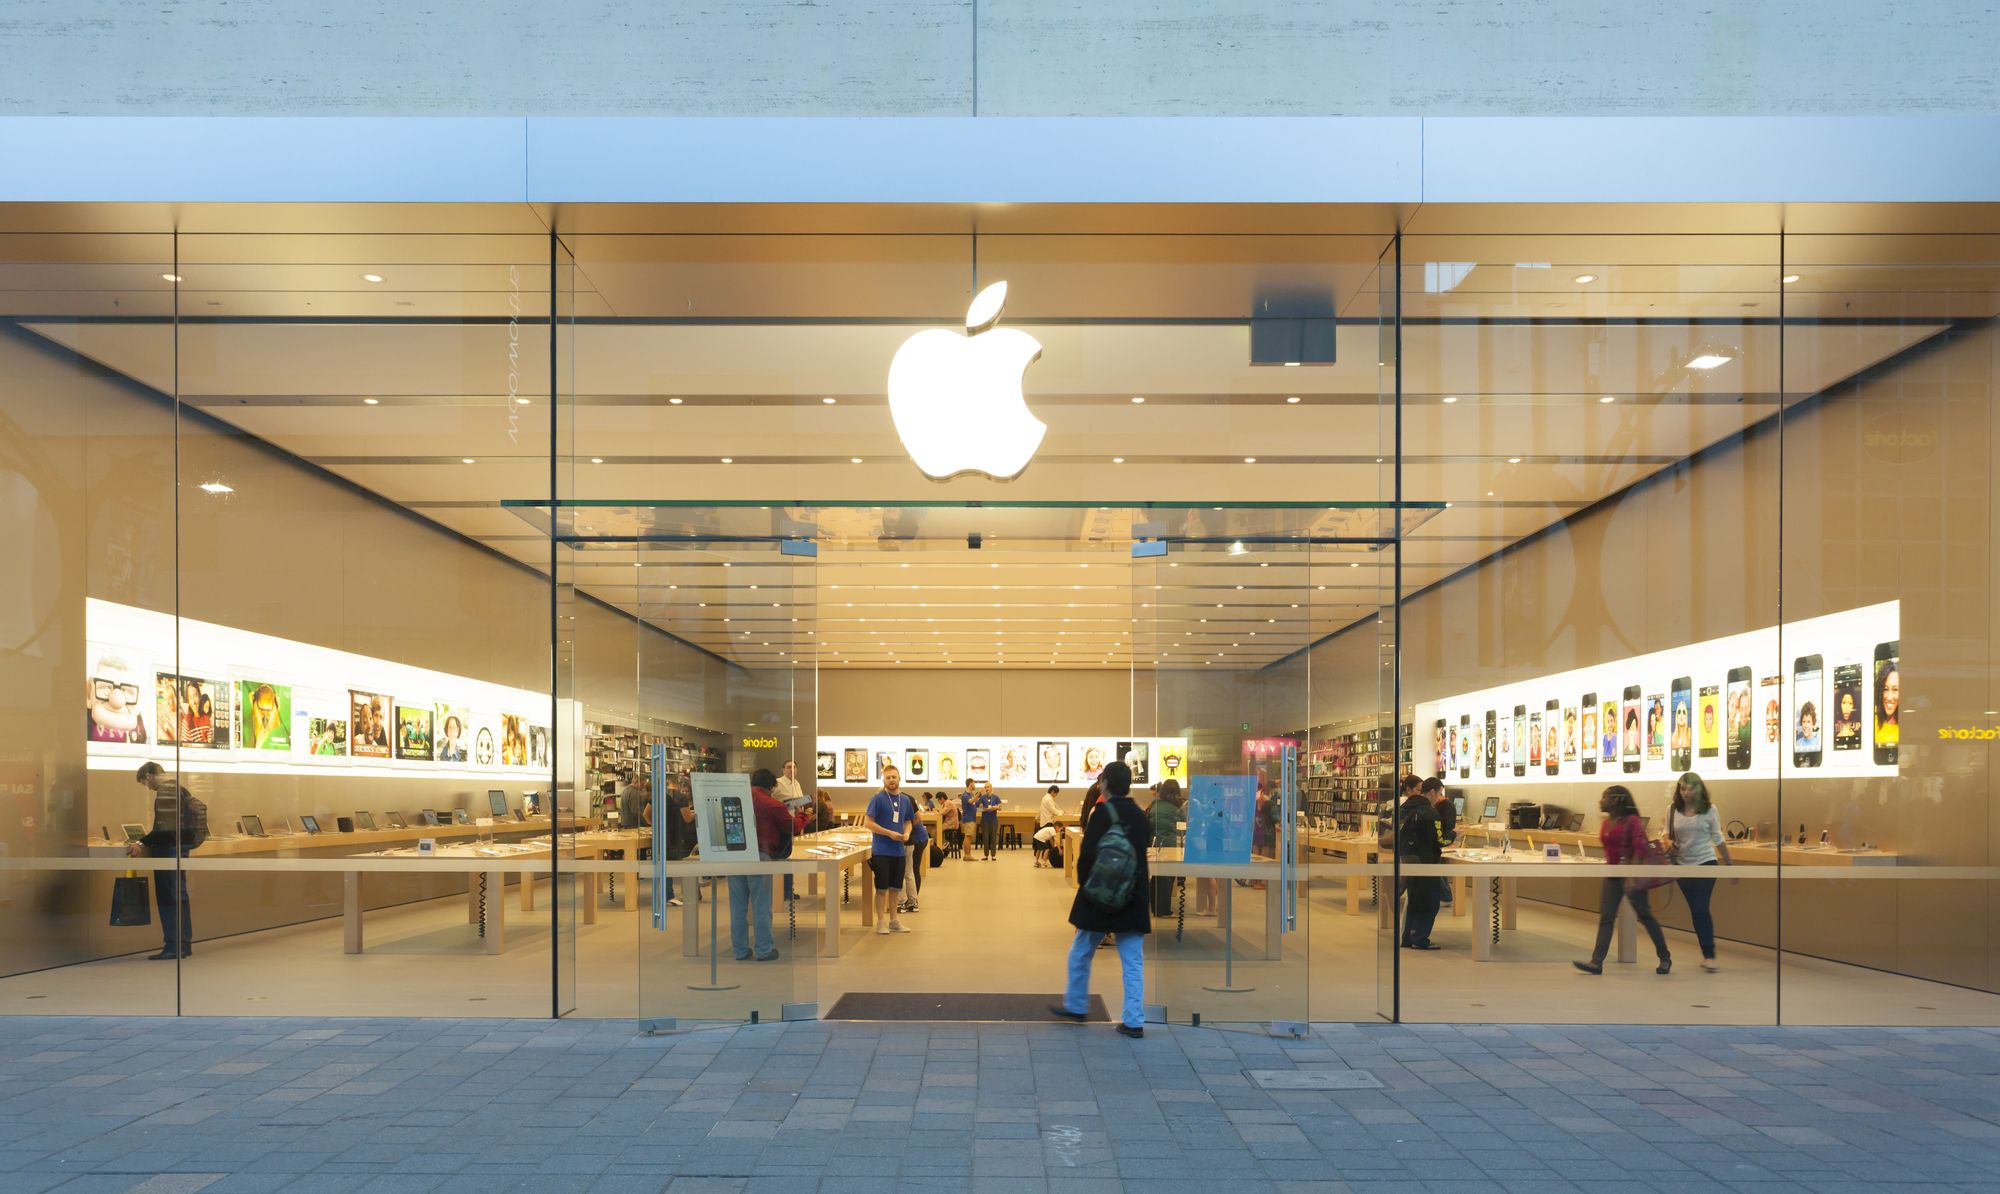 Adelaide, Australia - September 23, 2013: Apple Store in Adelaide, Australia, with pedestrians passing by outside the store. It is the first Apple Store in South Australia. It is located at Rundle Mall, Adelaide.